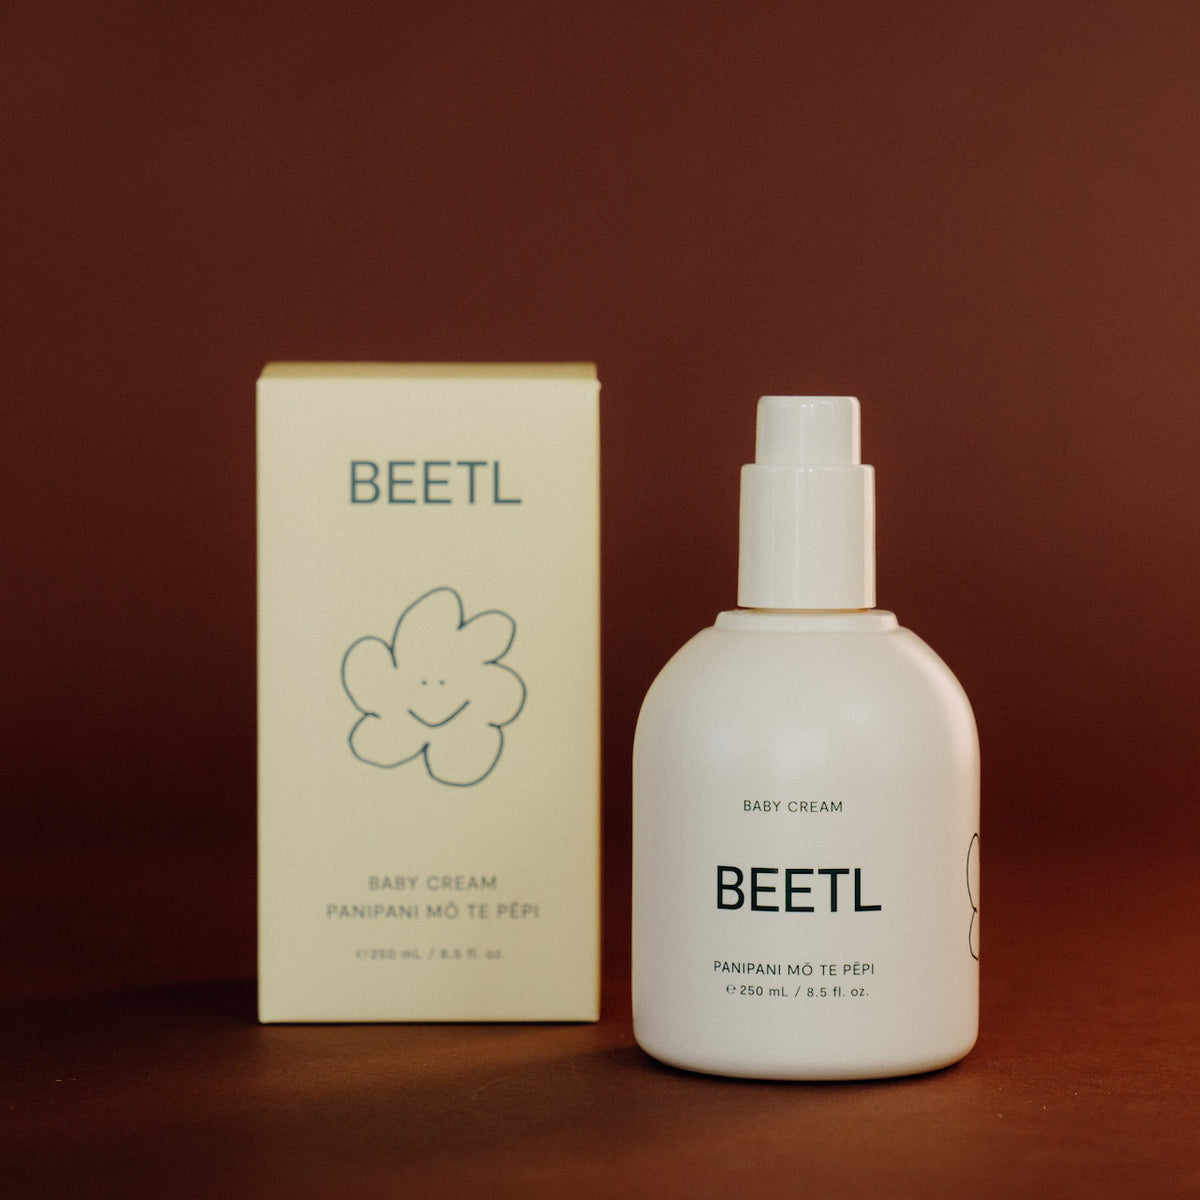 Small mixed Carrier + Beetl Baby Cream